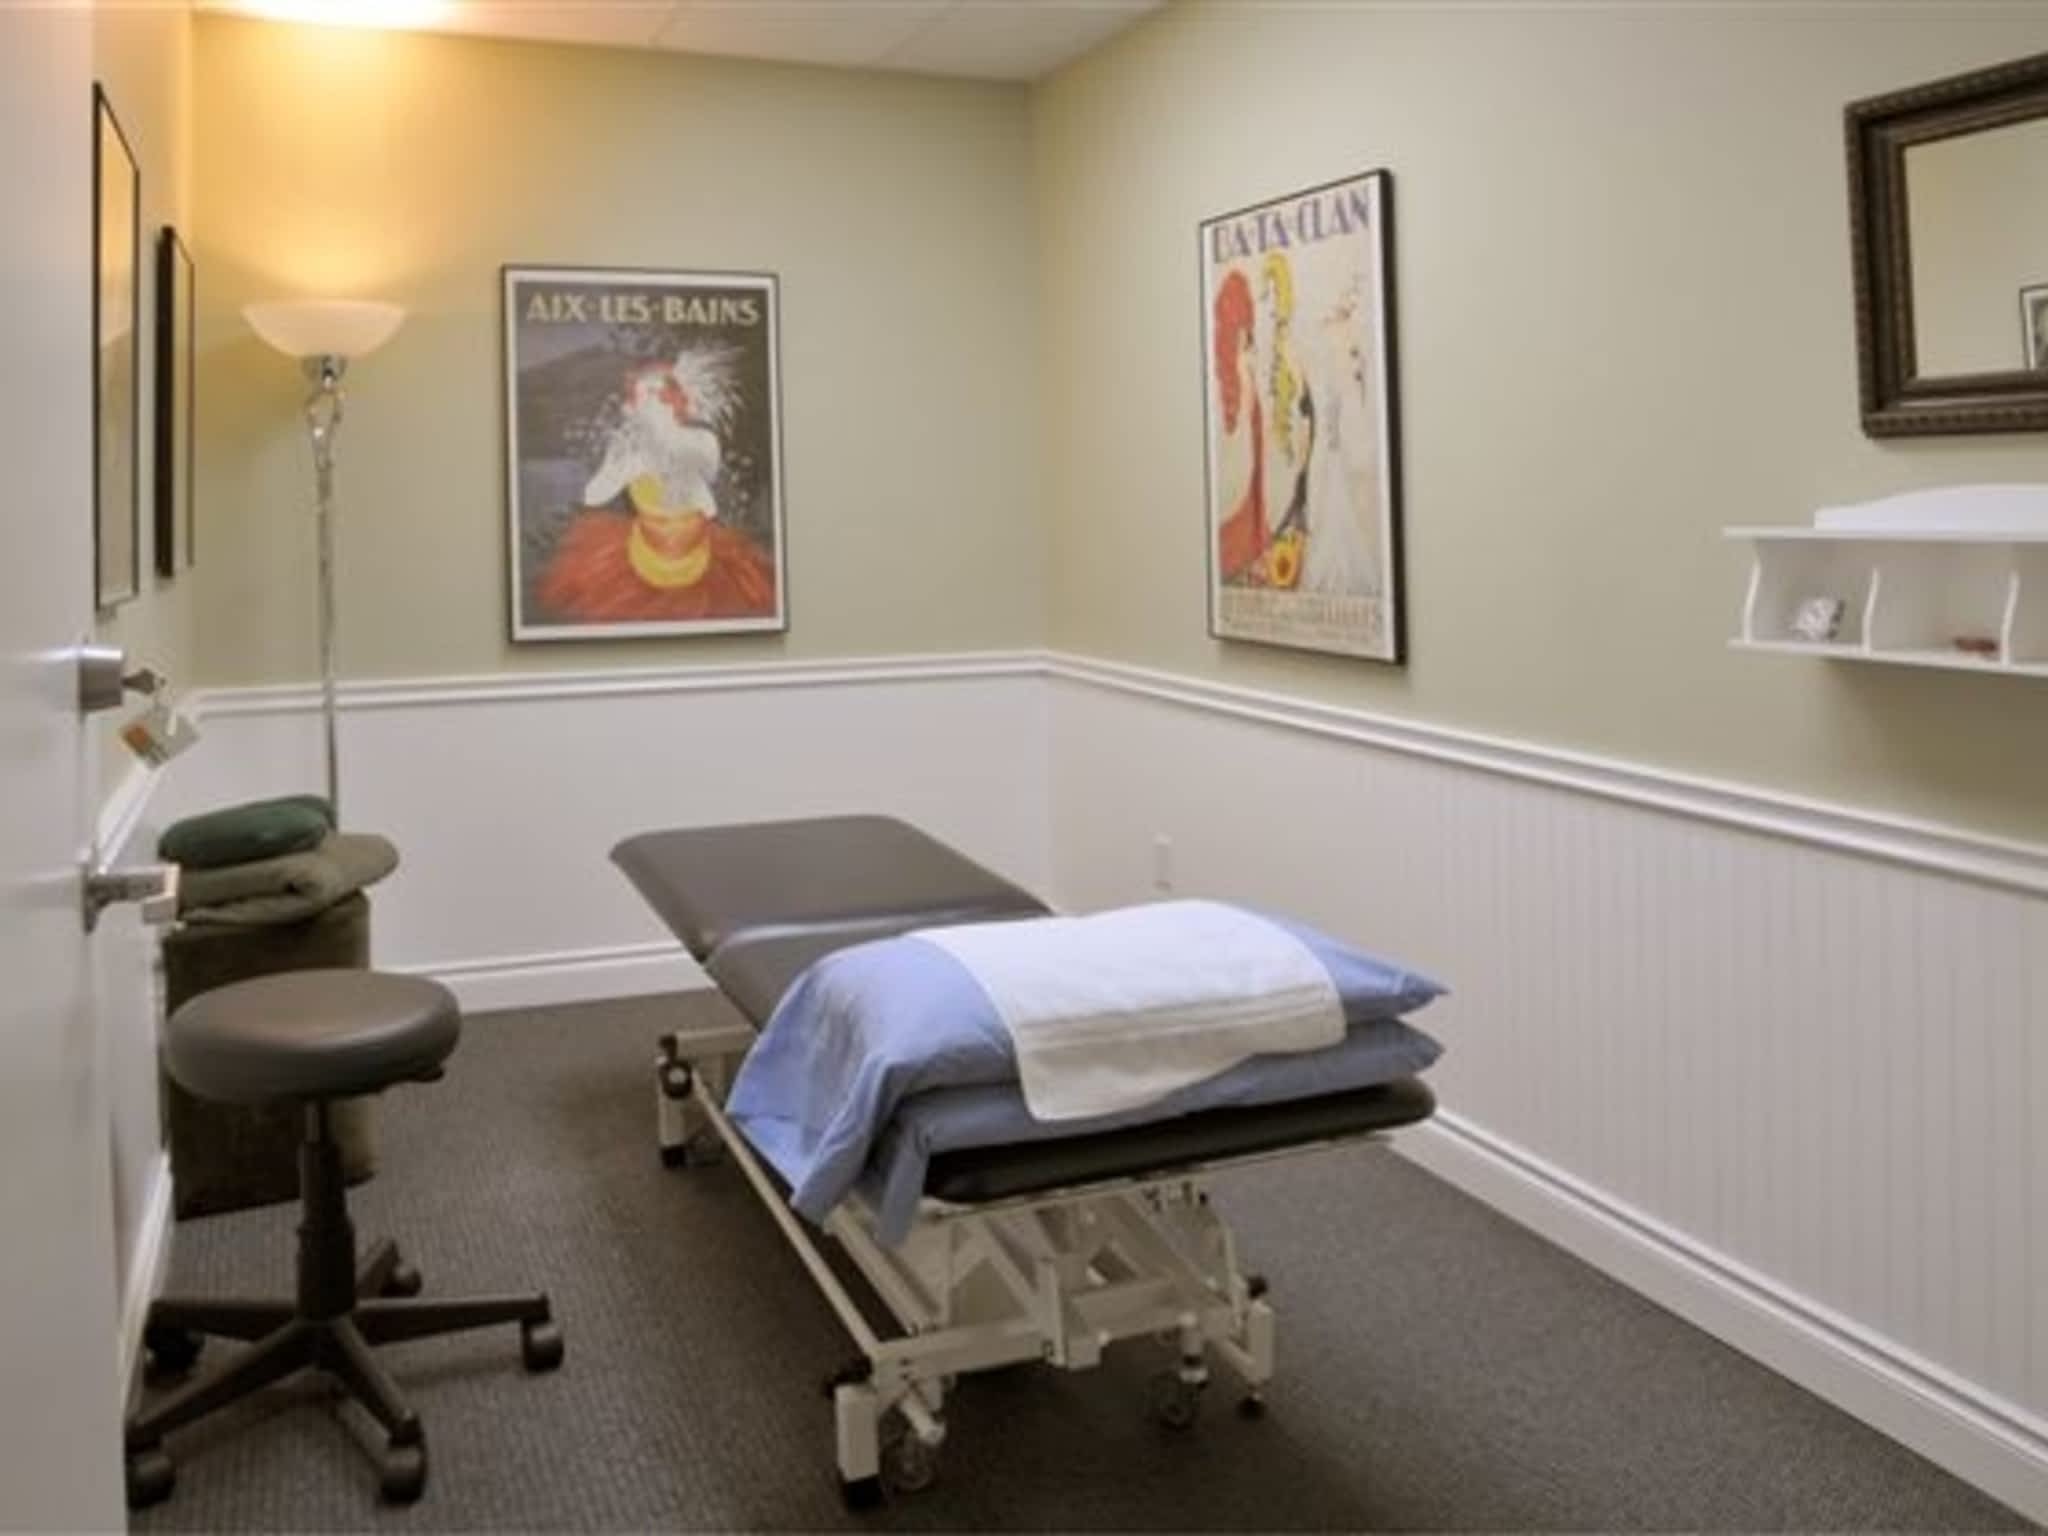 photo Shelbourne Physiotherapy